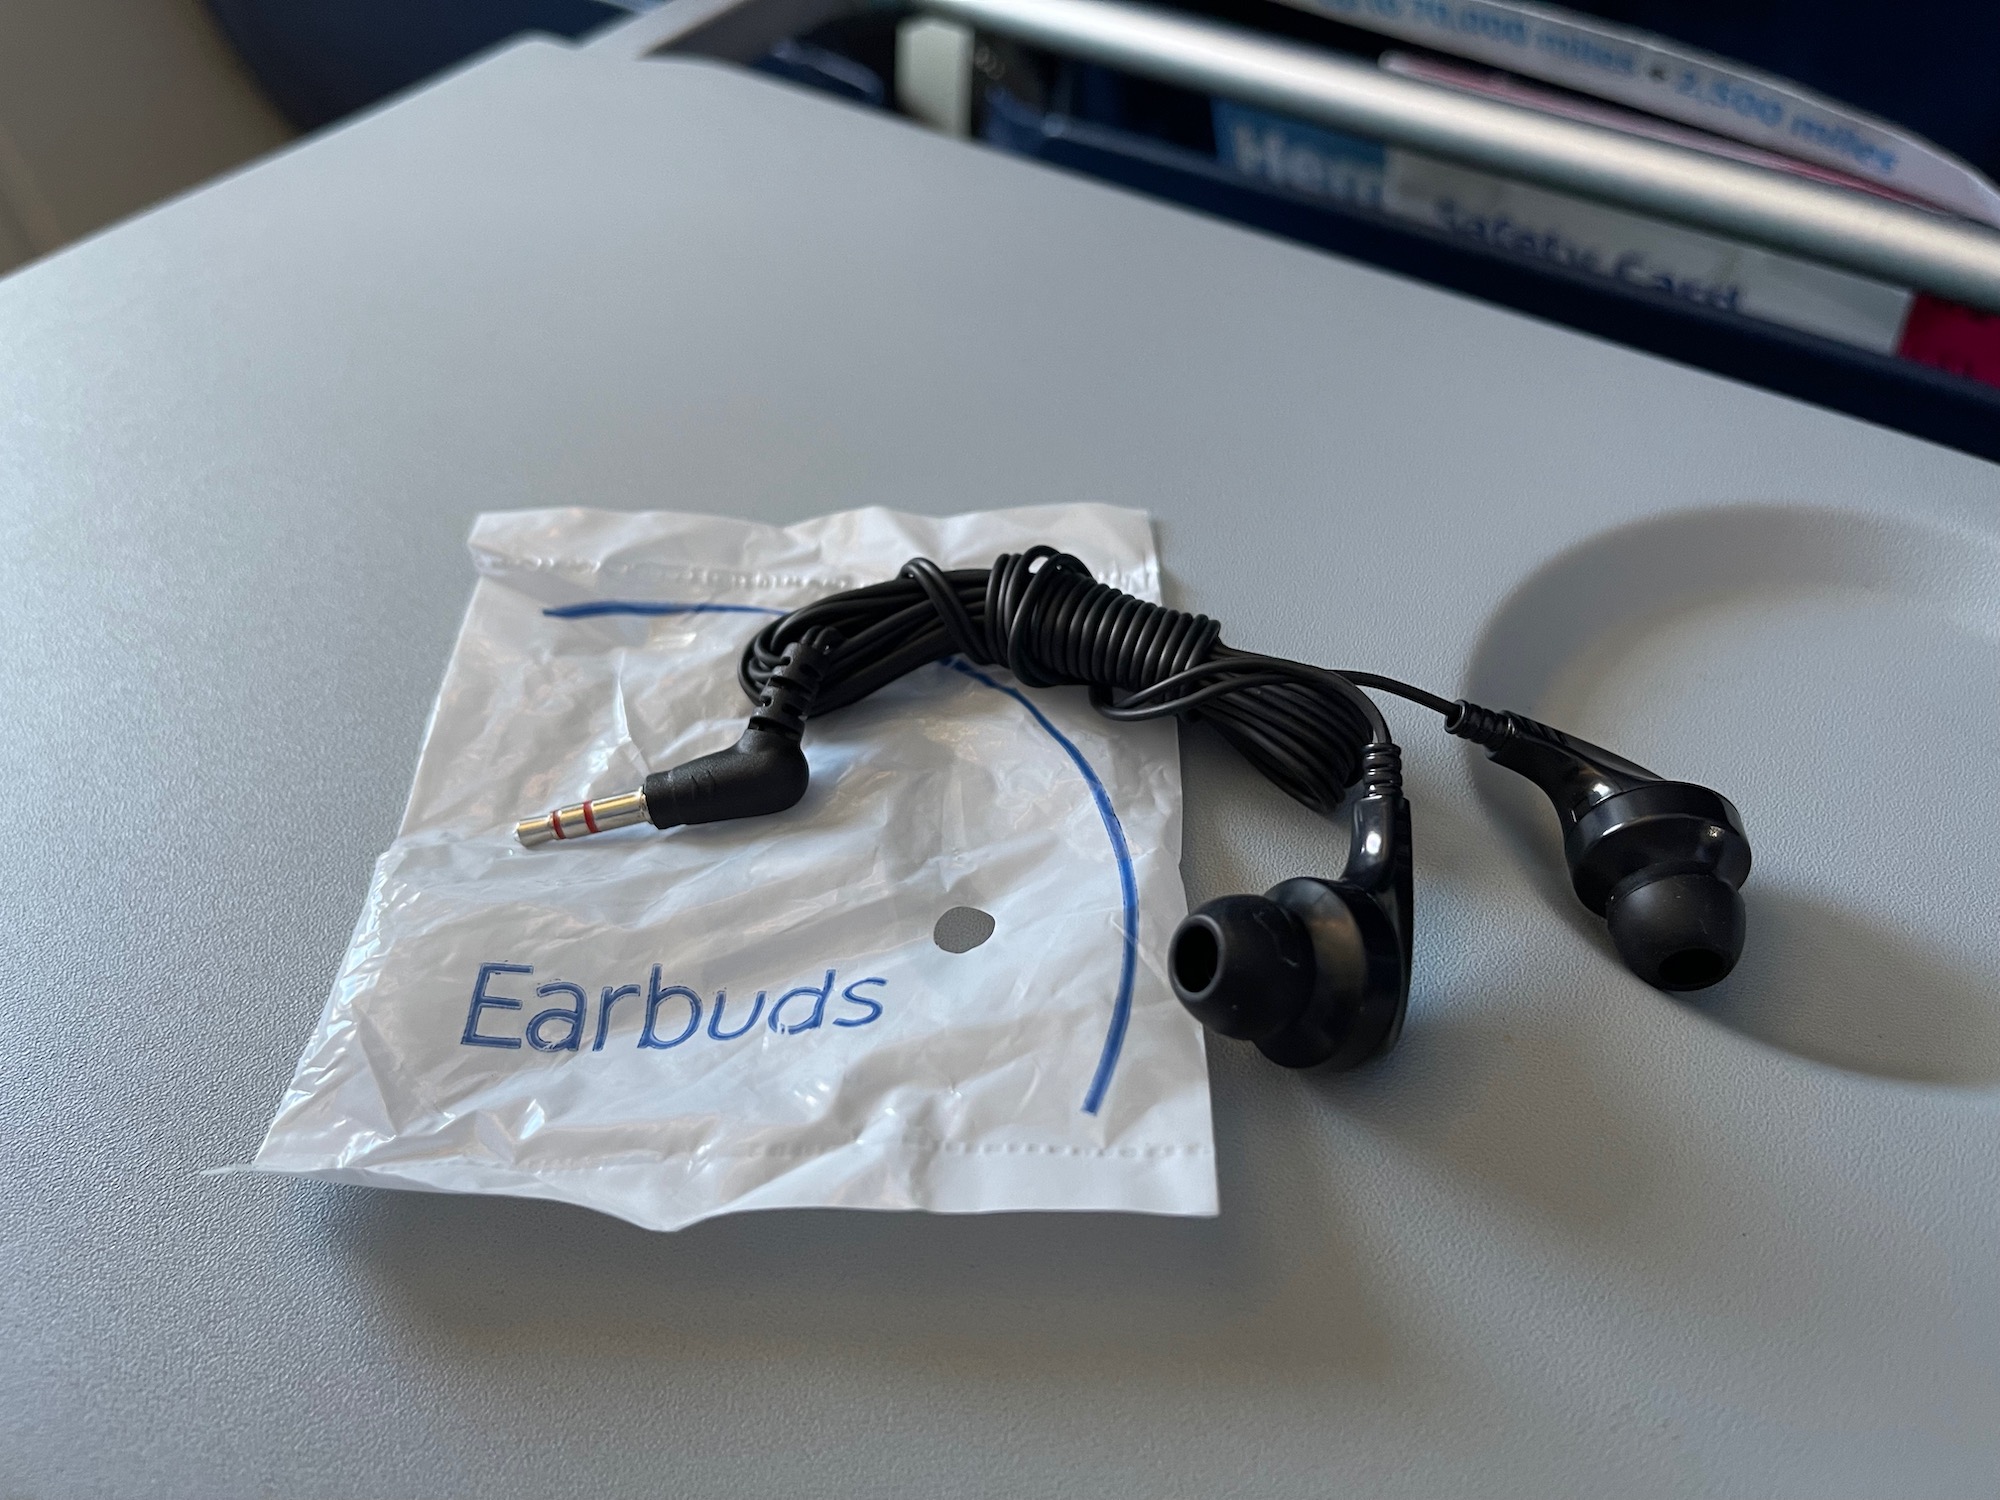 a black earbuds on a white package